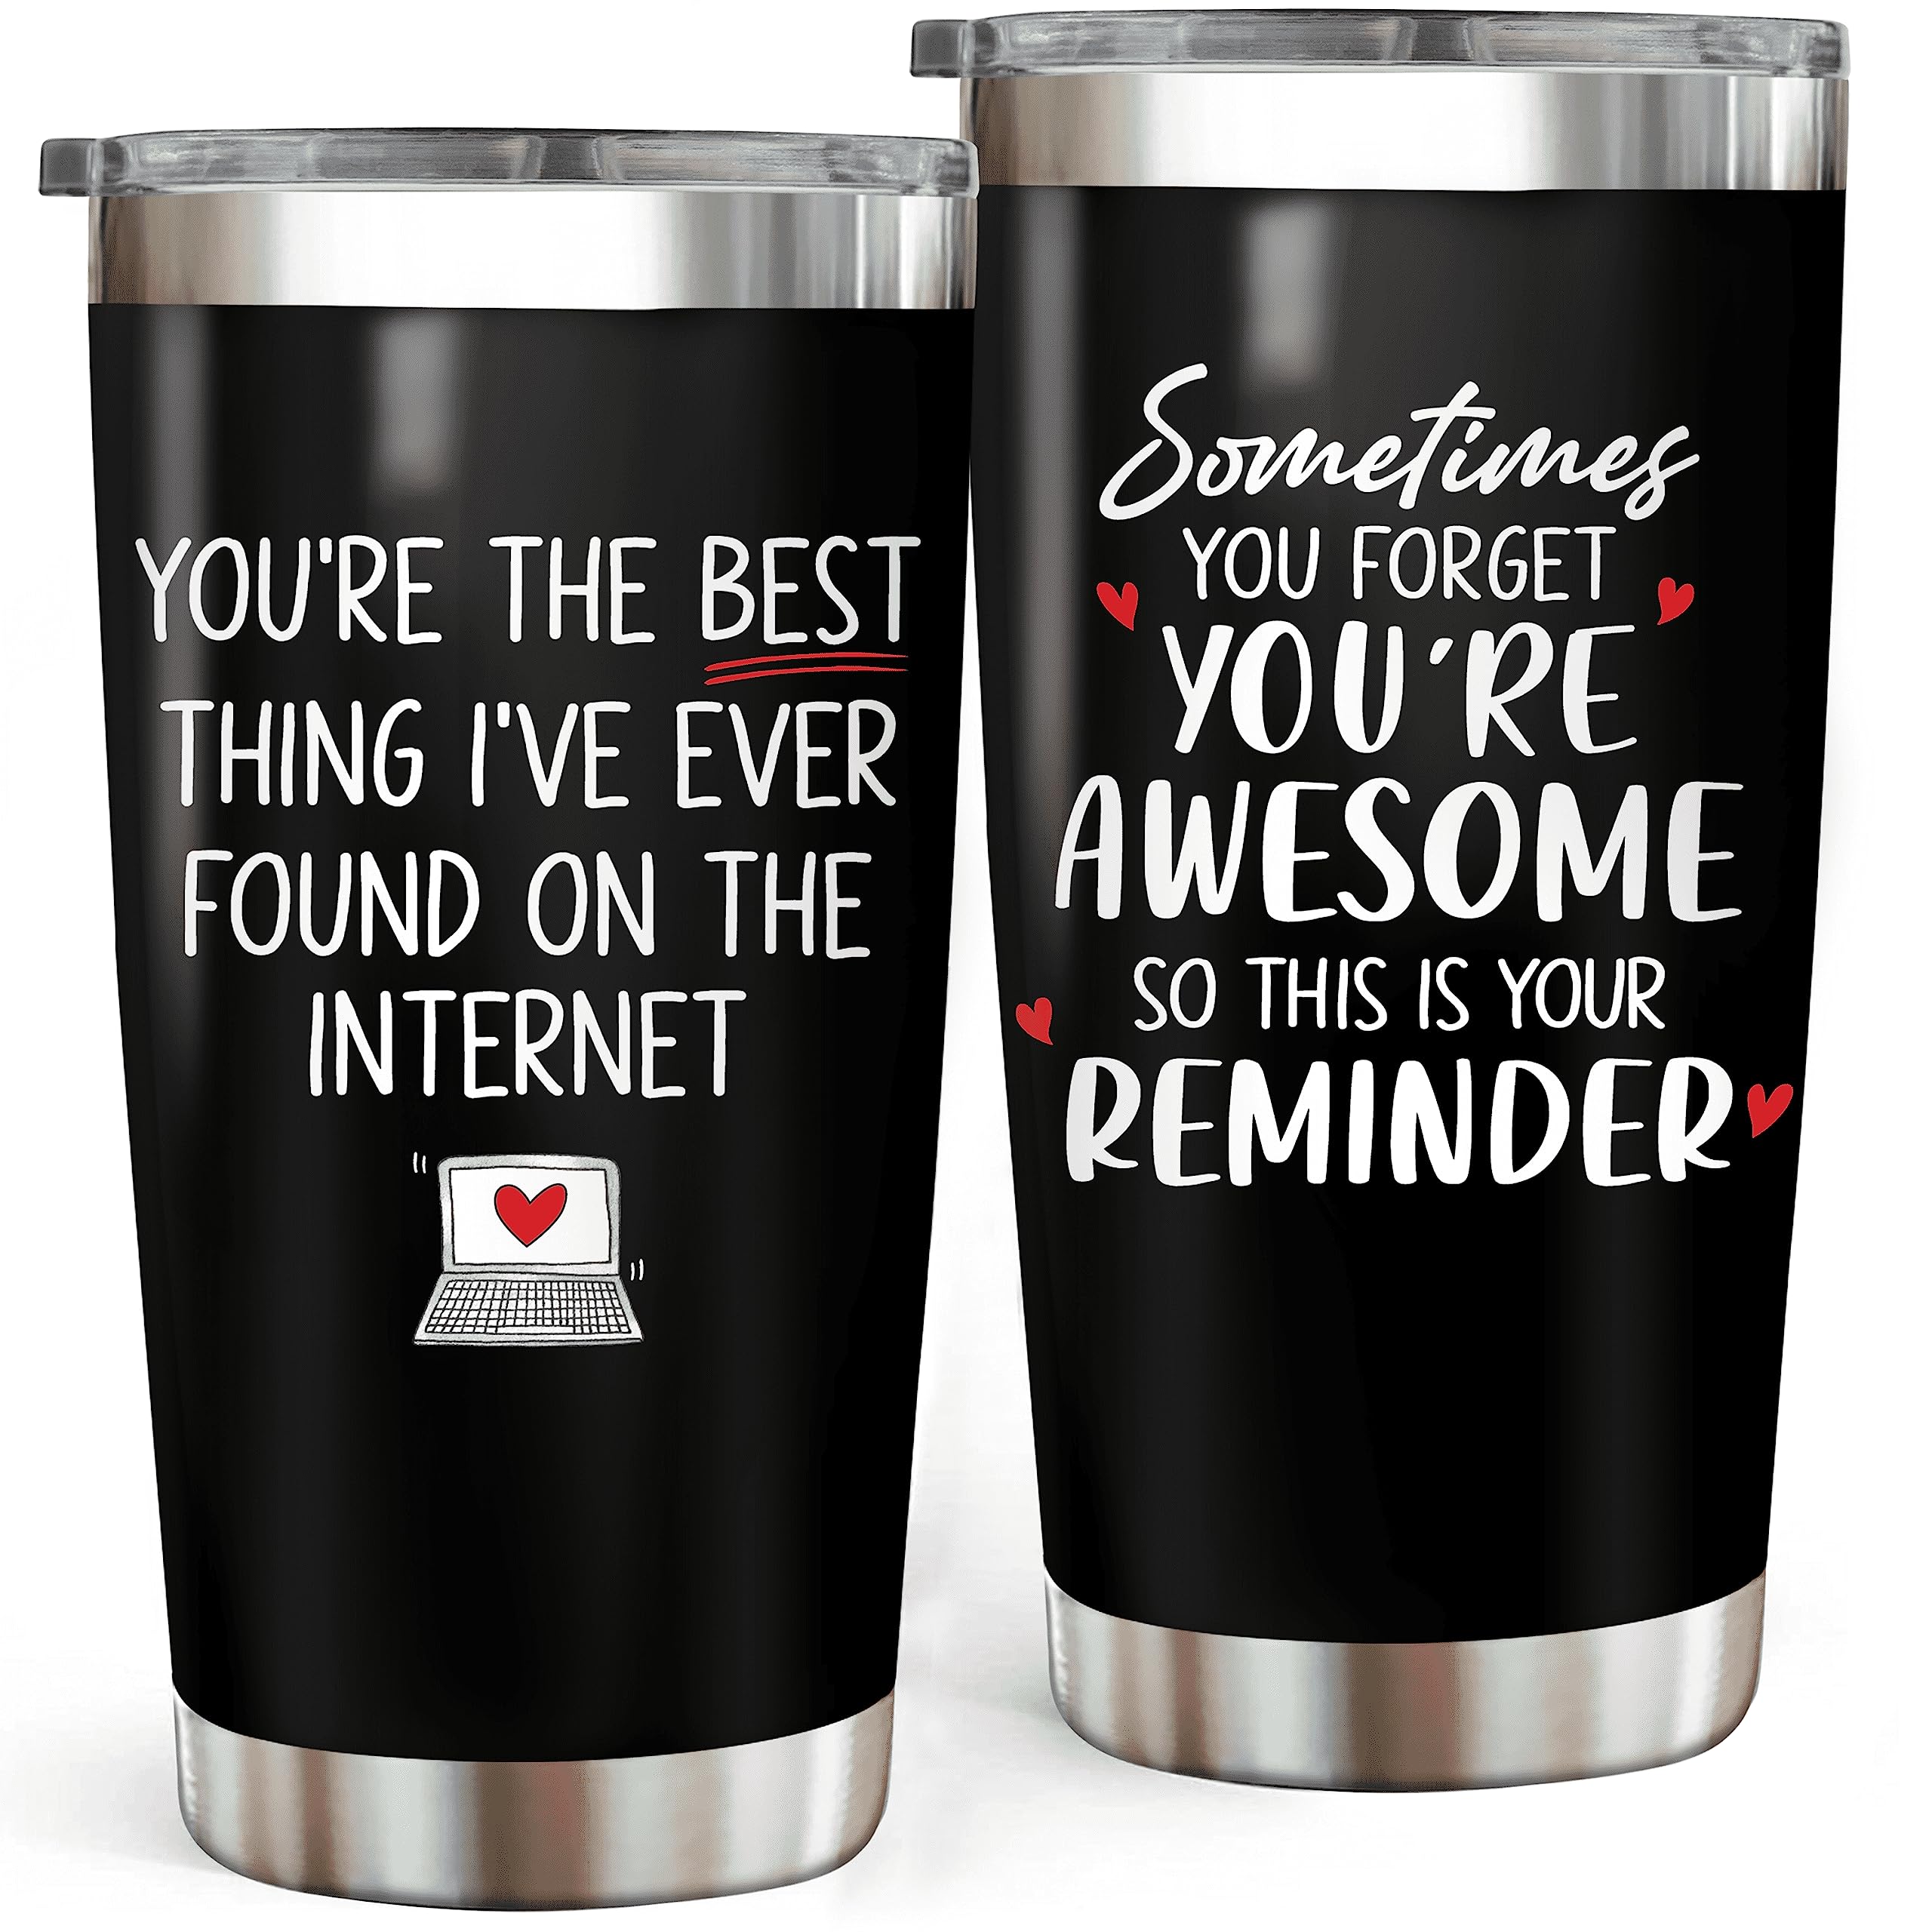 ZAGKOO Anniversary For Him, Her Gifts - Gifts For Boyfriend, Girlfriend, Husband, Wife, Friends - Romantic I Love You Couple Gifts For Him, Her - Birthday Gifts For Him, Her, Men, Women - Tumbler 20oz